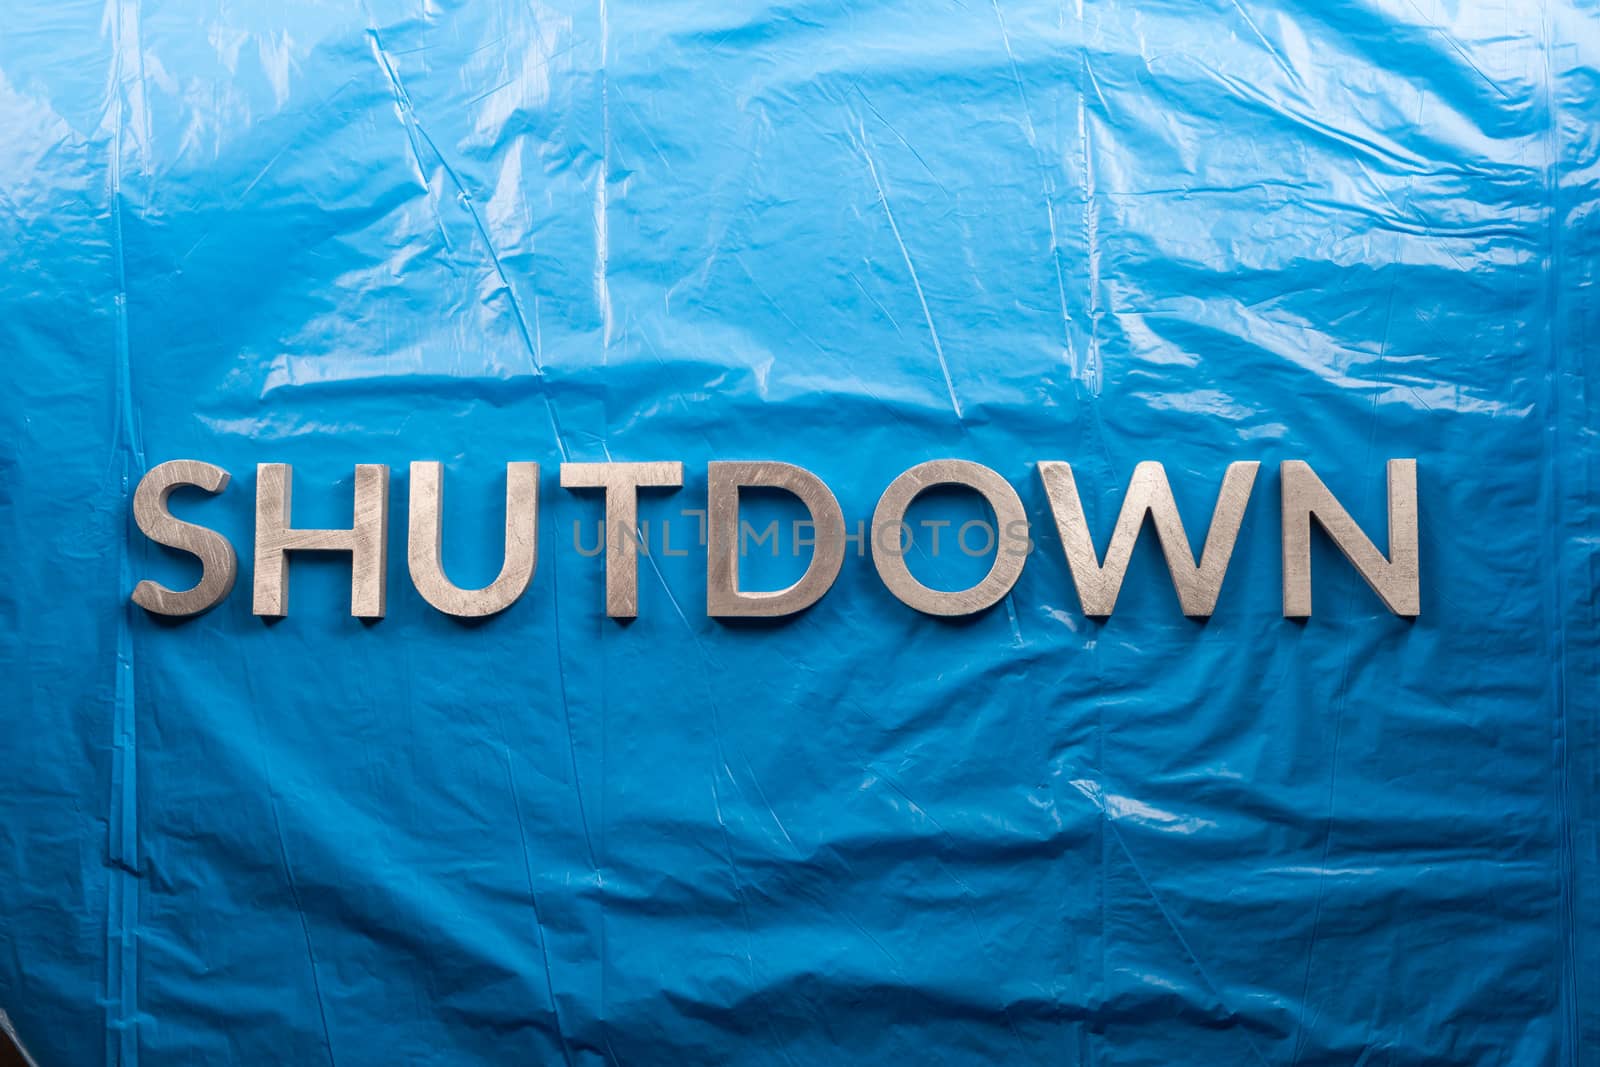 the word shutdown laid with silver metal letters on crumpled blue plastic film background in flat lay perspective.